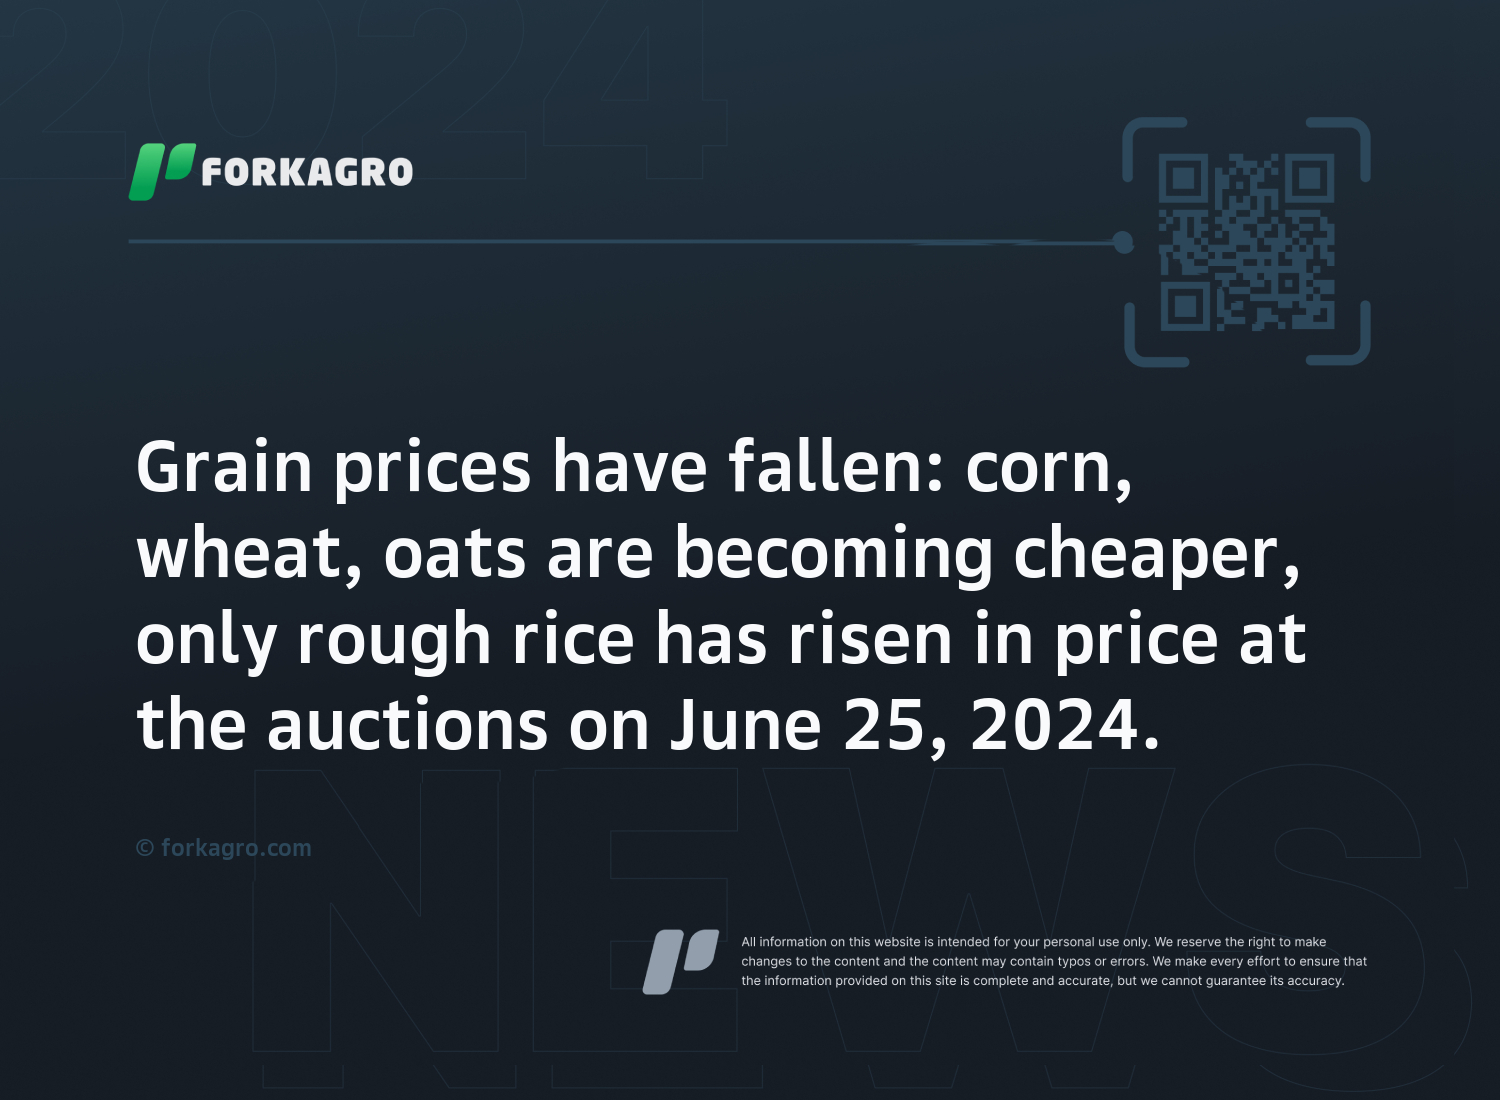 Grain prices have fallen: corn, wheat, oats are becoming cheaper, only rough rice has risen in price at the auctions on June 25, 2024.